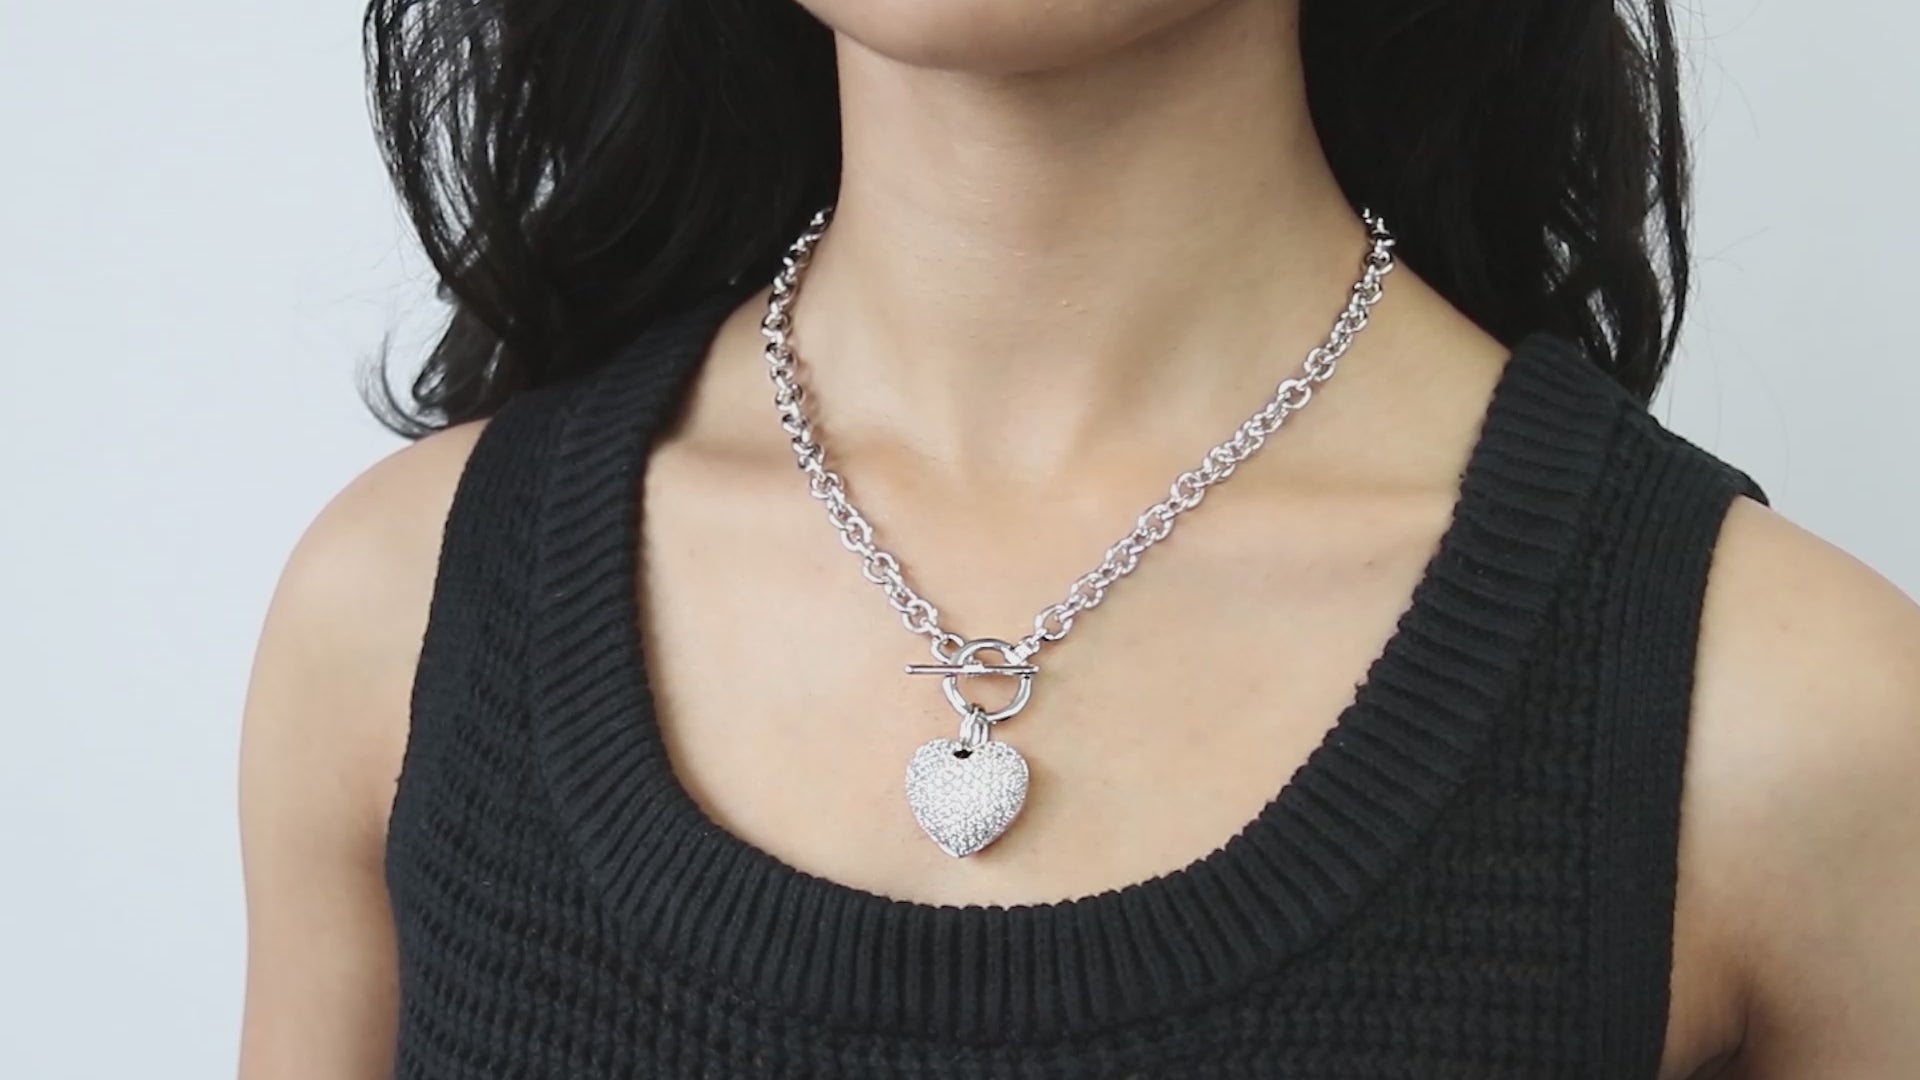 Video Contains Heart CZ Necklace Earrings and Bracelet Set in Silver-Tone. Style Number VS255